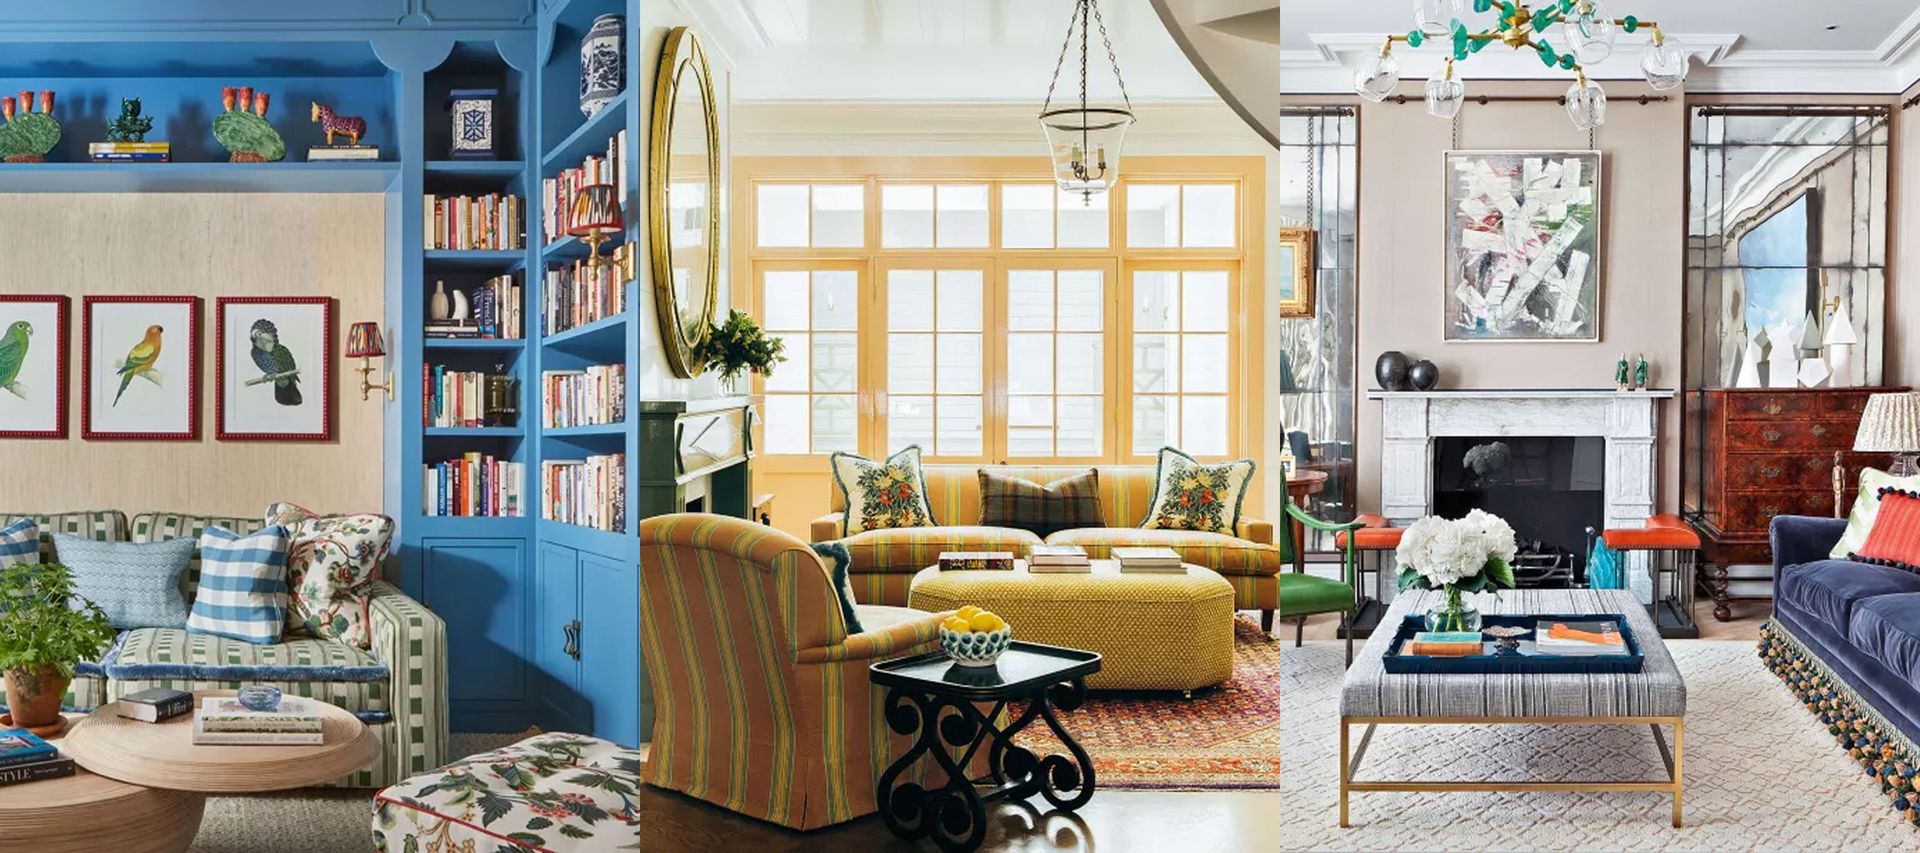 16 living room trends experts agree will take over in 2023 | Homes ...